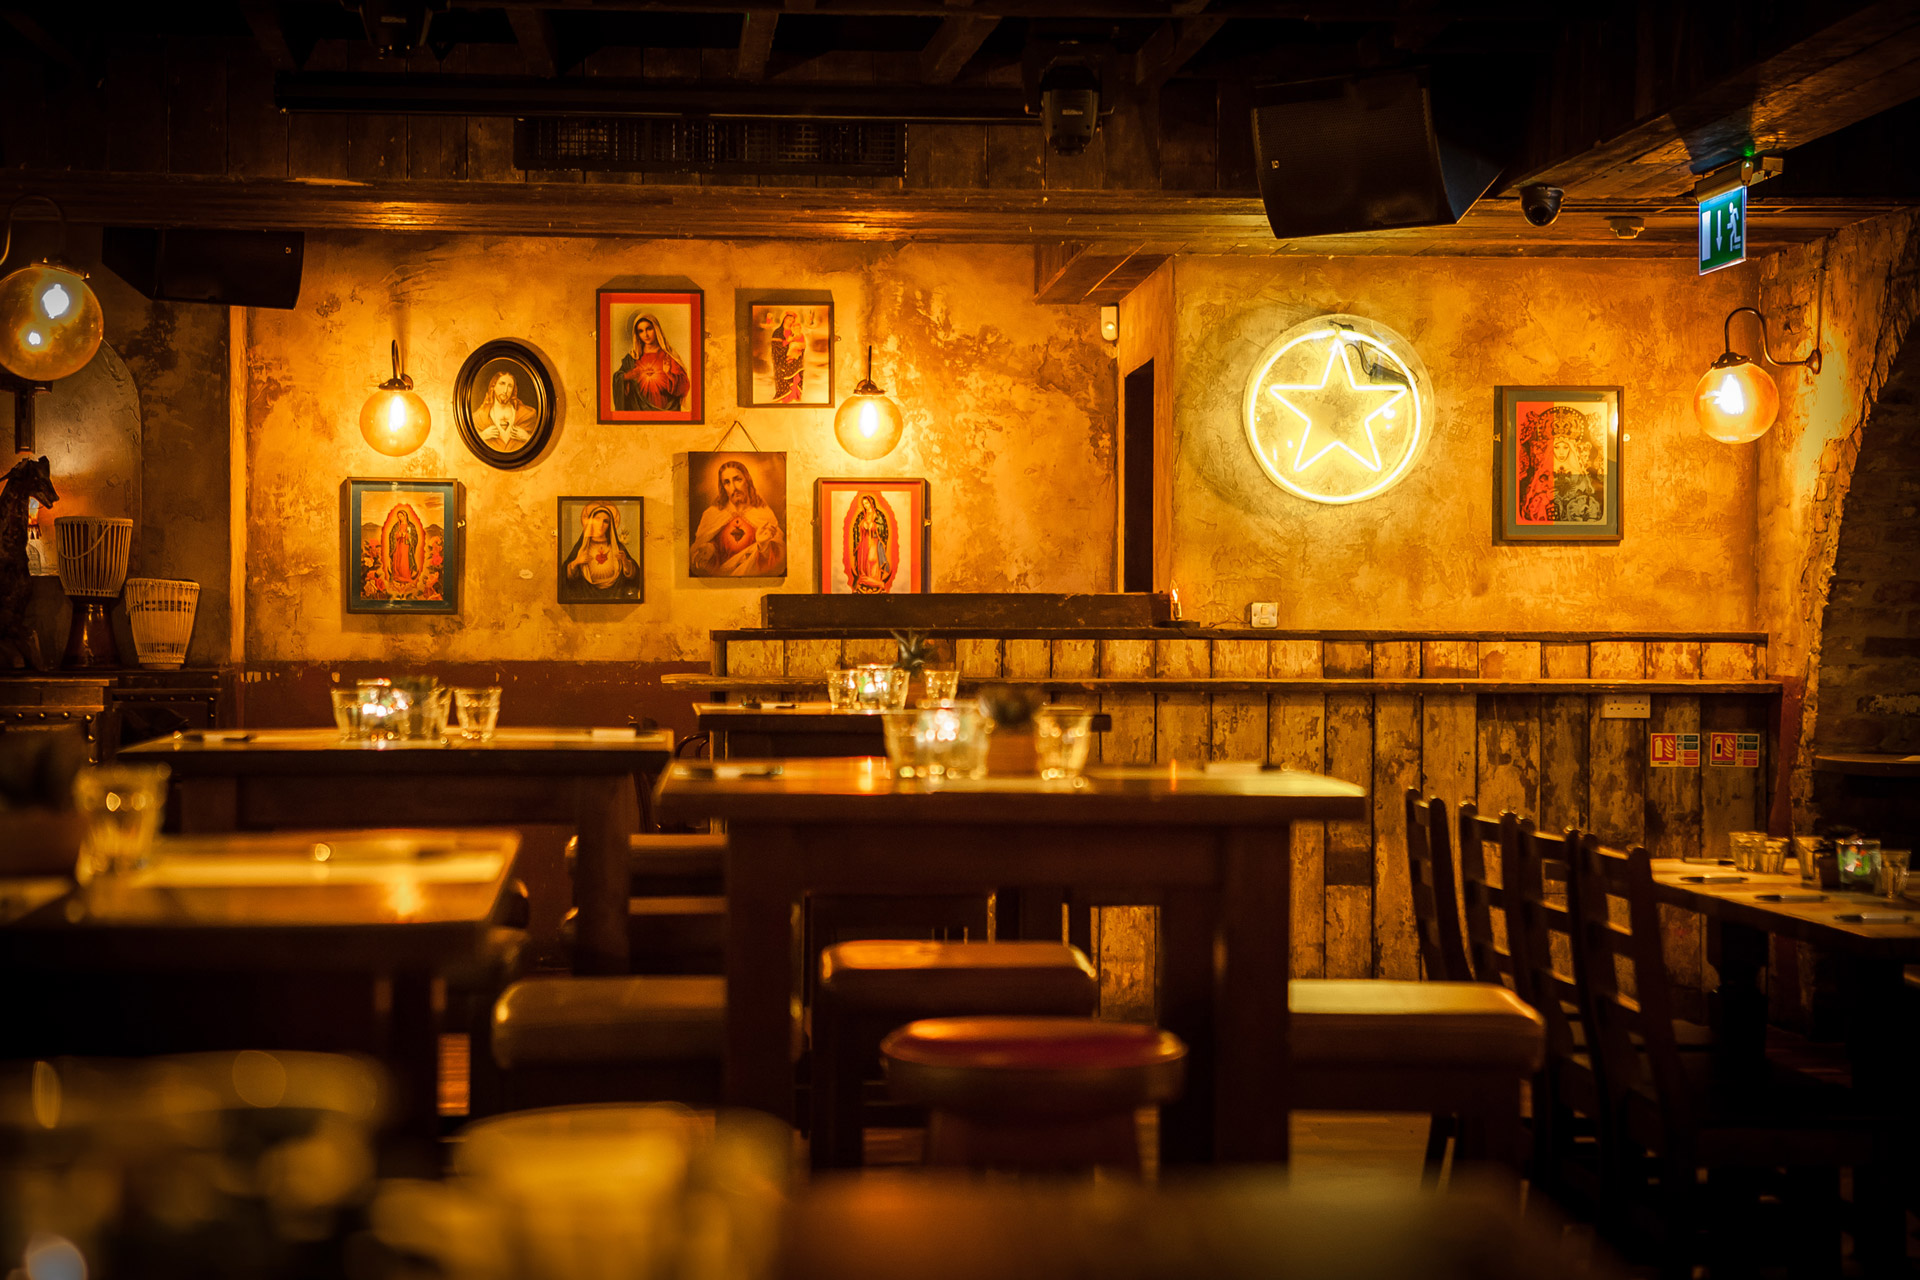 Our Riad light fixtures add a golden glow to the rustic interior of Xico, Dublin